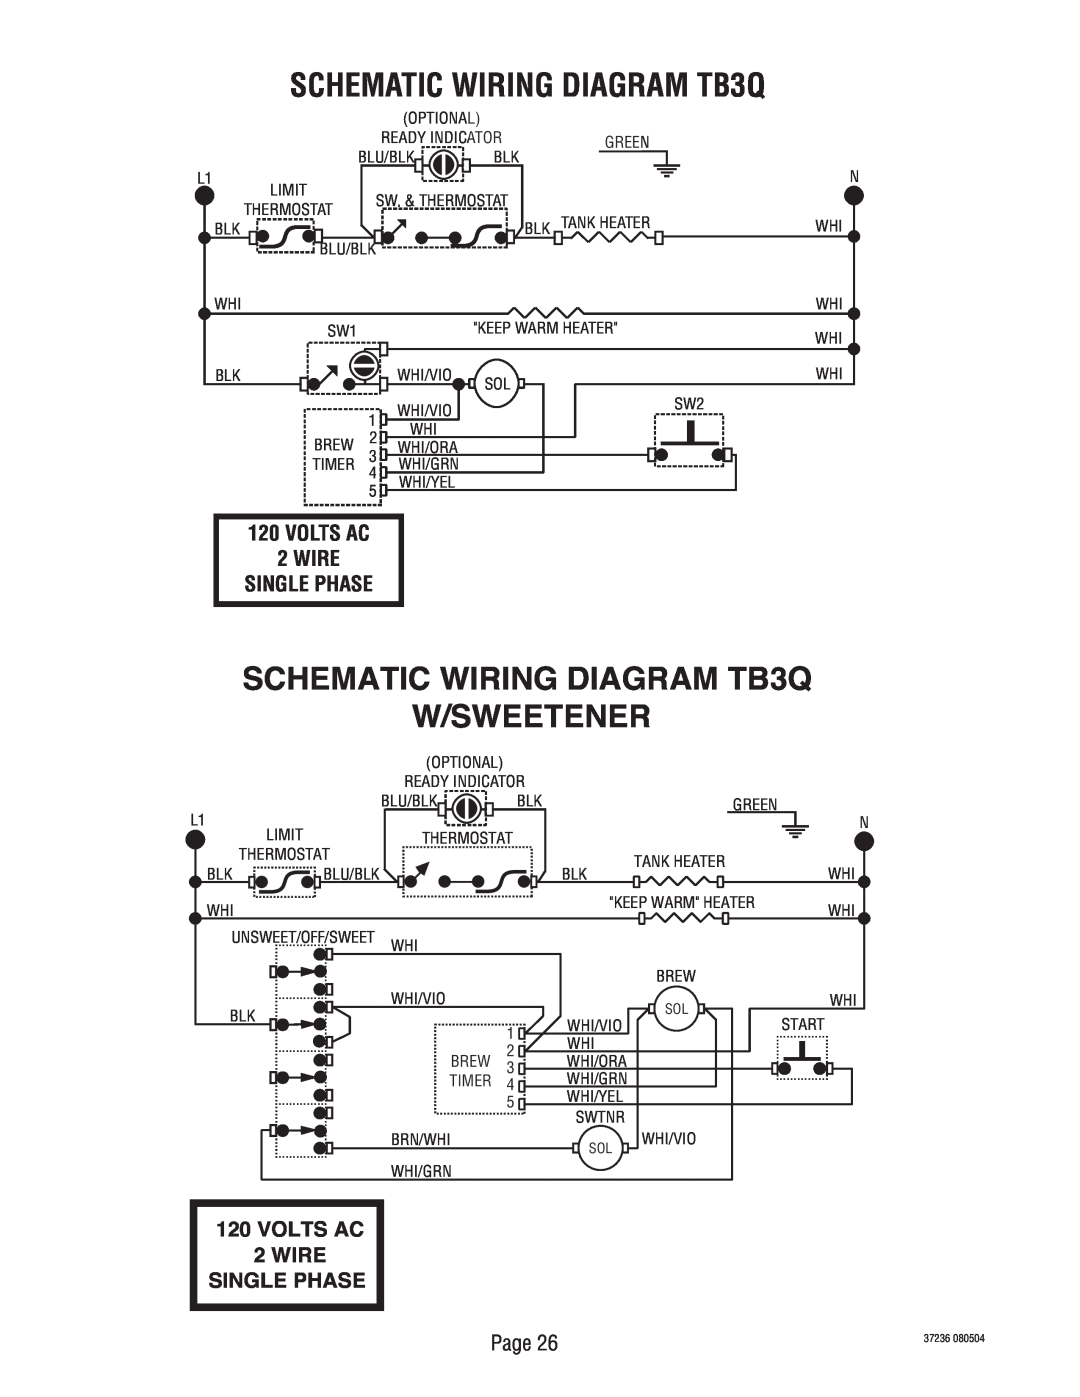 Bunn TB3Q-LP SCHEMATIC WIRING DIAGRAM TB3Q W/SWEETENER, VOLTS AC 2 WIRE SINGLE PHASE, Volts Ac, Wire, Single Phase 